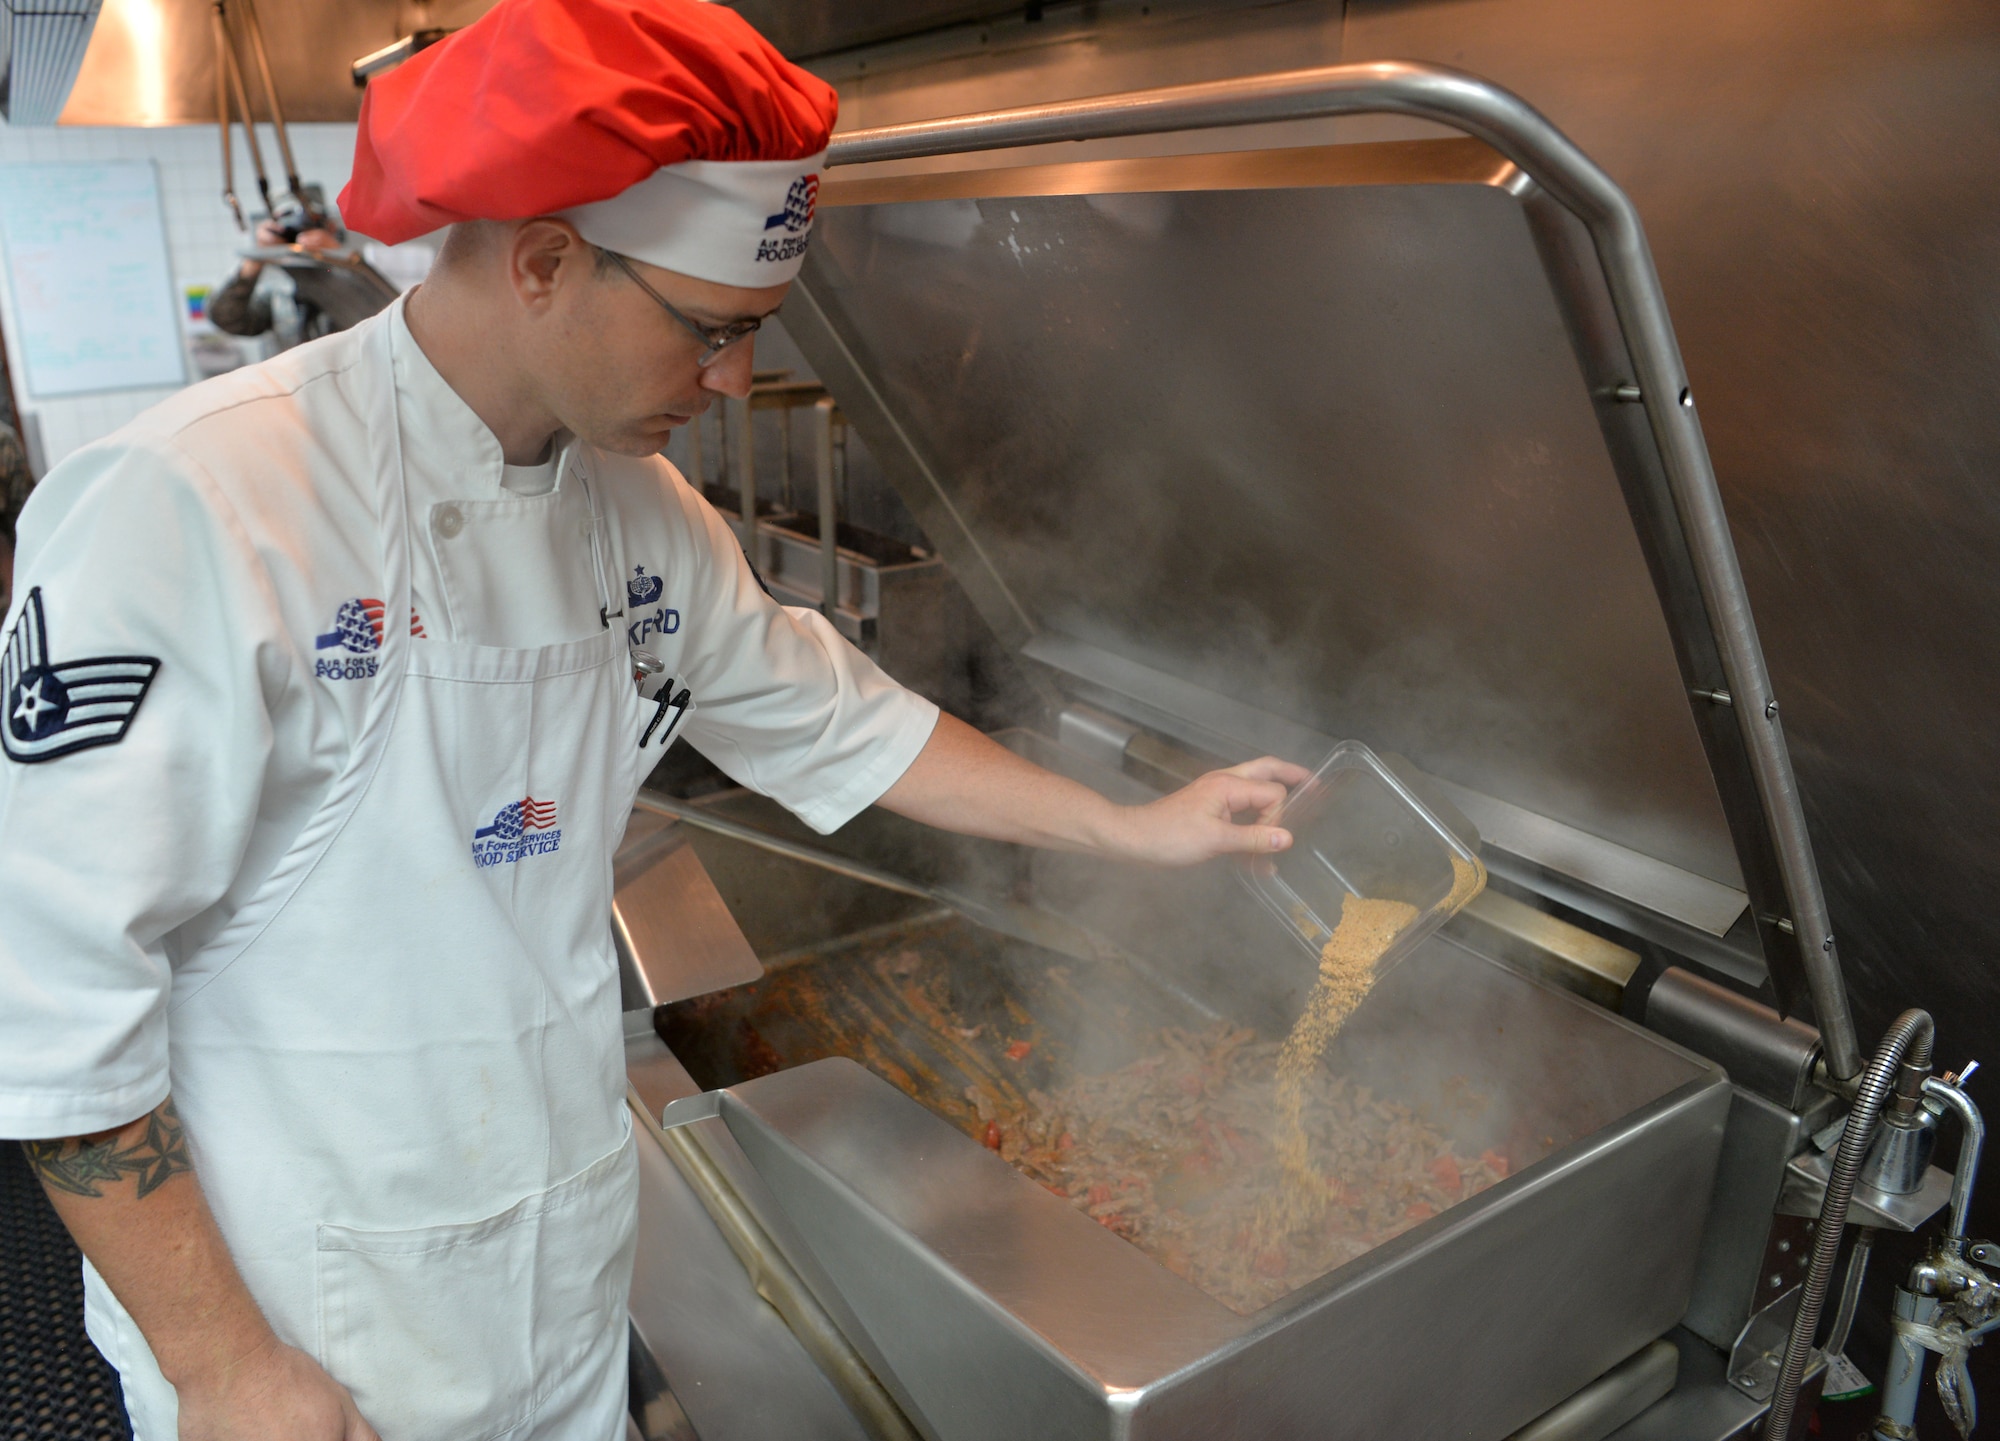 Staff Sgt. Daniel Bickford, 99th Force Support Squadron food service craftsman, adds seasoning to a dish for service members on temporary duty to Red Flag 19-3 at Nellis Air Force Base, Nev., July 18, 2019. Red Flag was established in 1975 to better prepare our forces for combat. Lessons from Vietnam showed that if a pilot survived ten combat missions, his chances of surviving remaining missions increased significantly. (U.S. Air Force photo by Tech. Sgt. Bryan Magee)